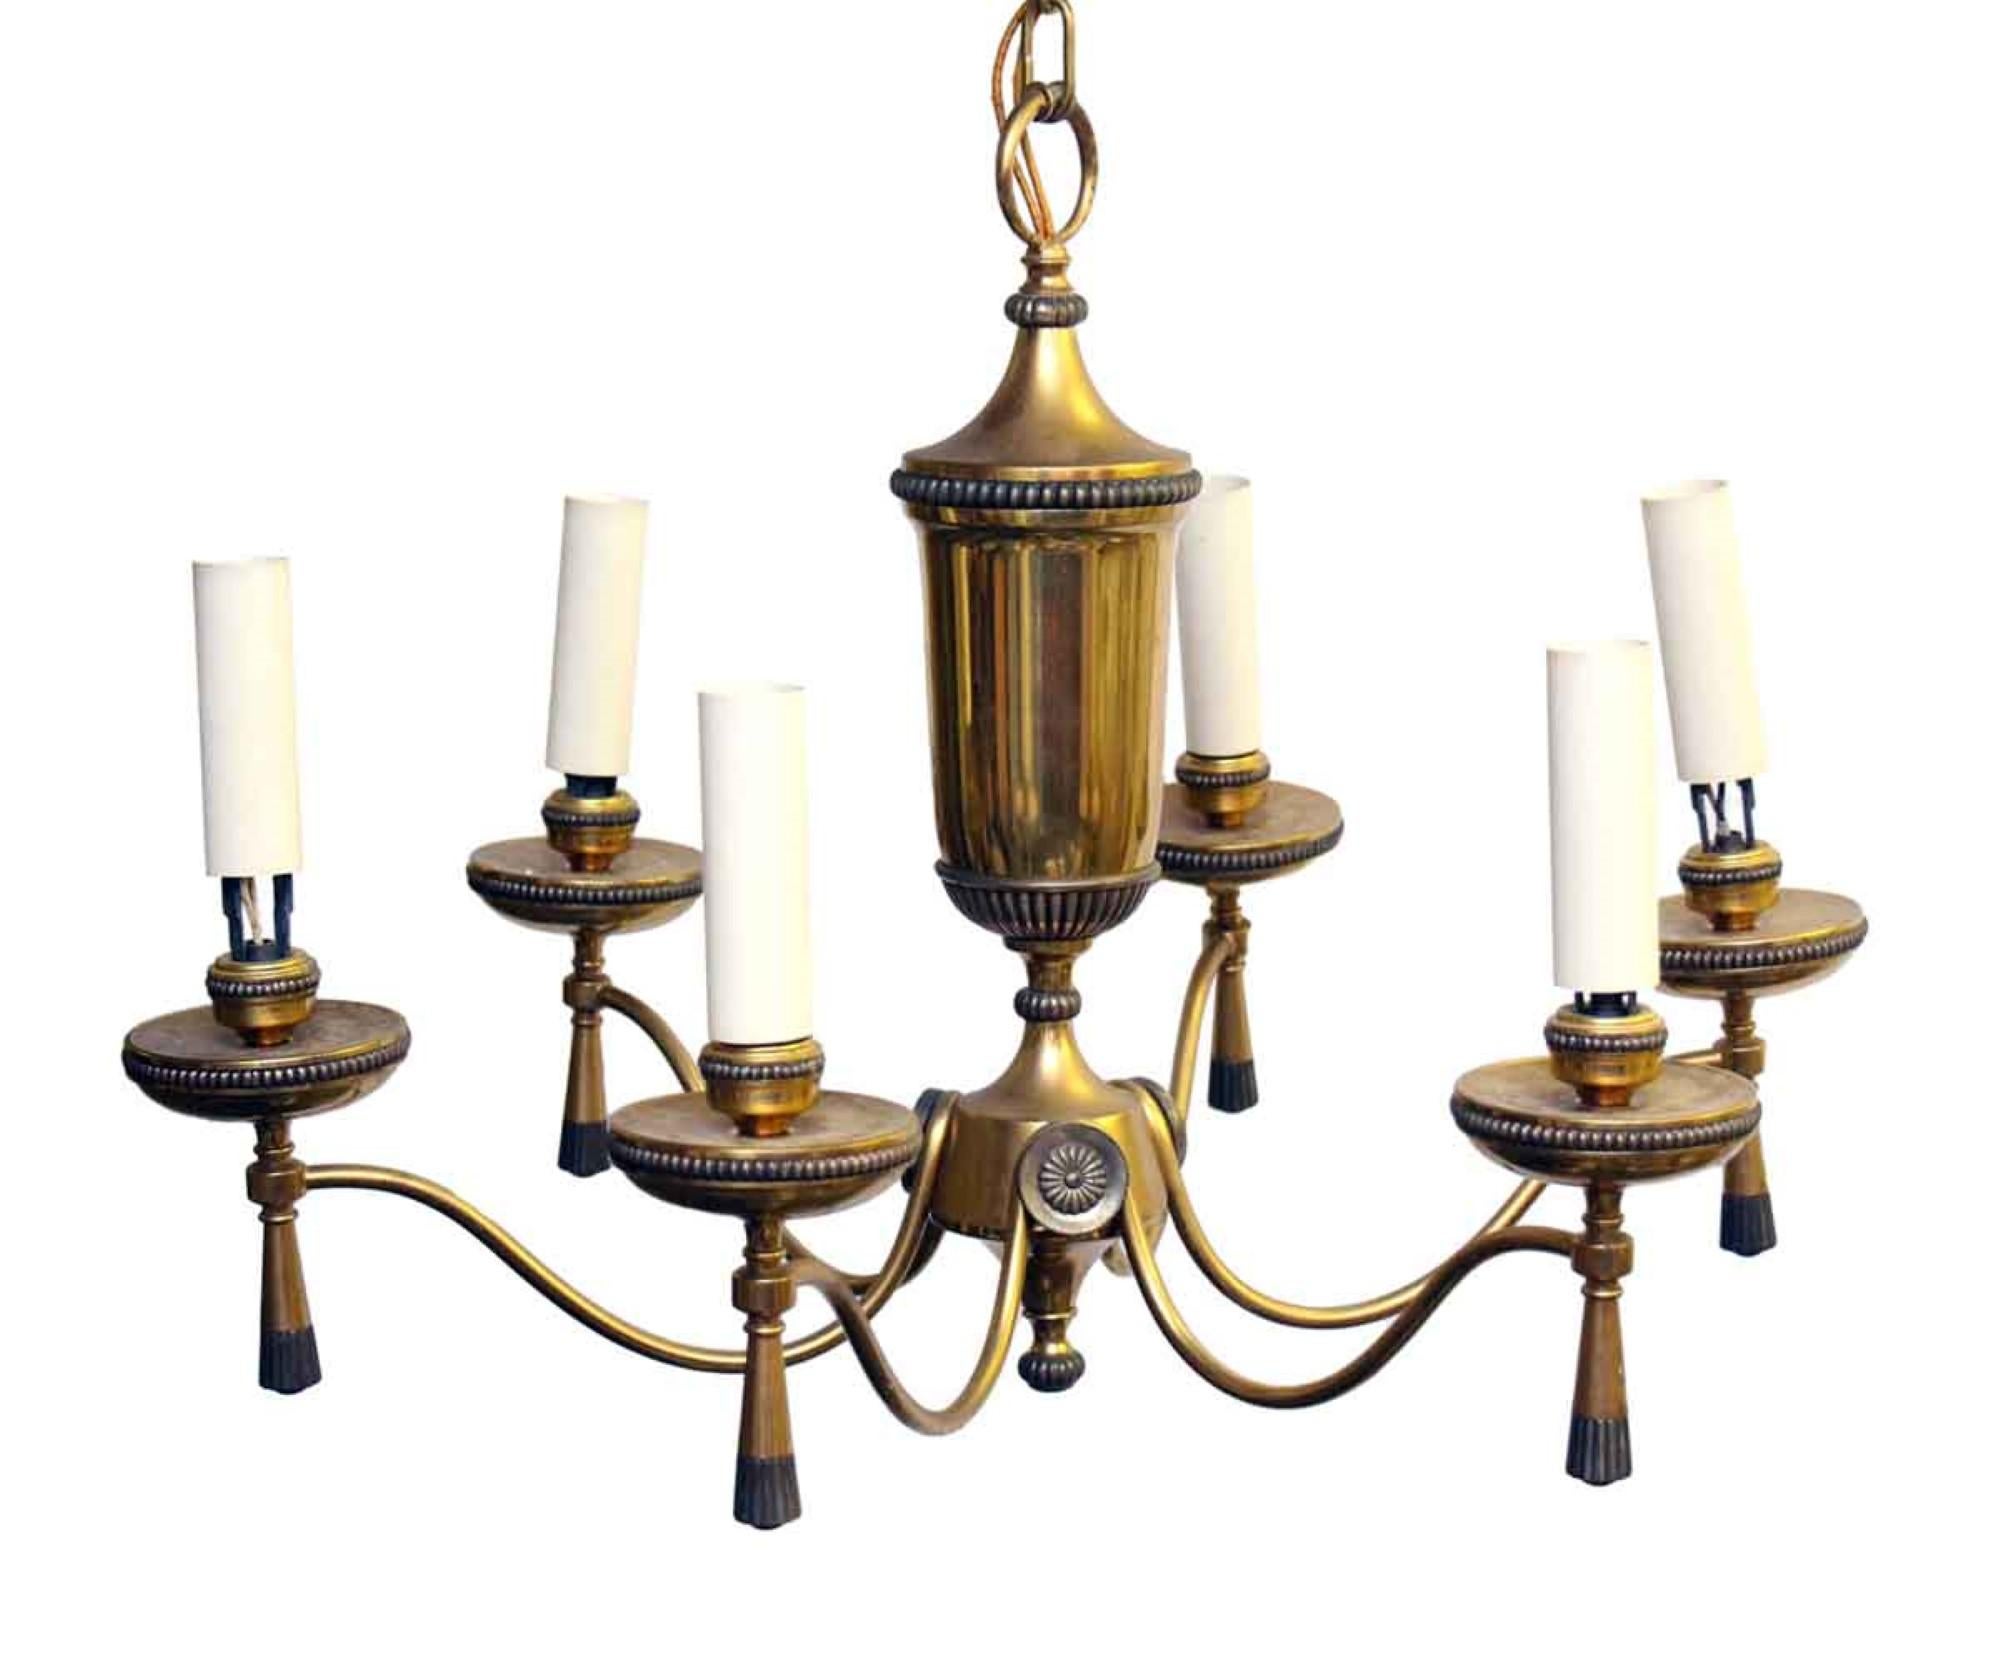 1940s Georgian style brass chandelier with beaded rosette detail and bottom tassels. Price includes restoration. Please allow 1-2 weeks to process. Please specify the overall drop that is needed upon purchasing. This can be seen at our 302 Bowery